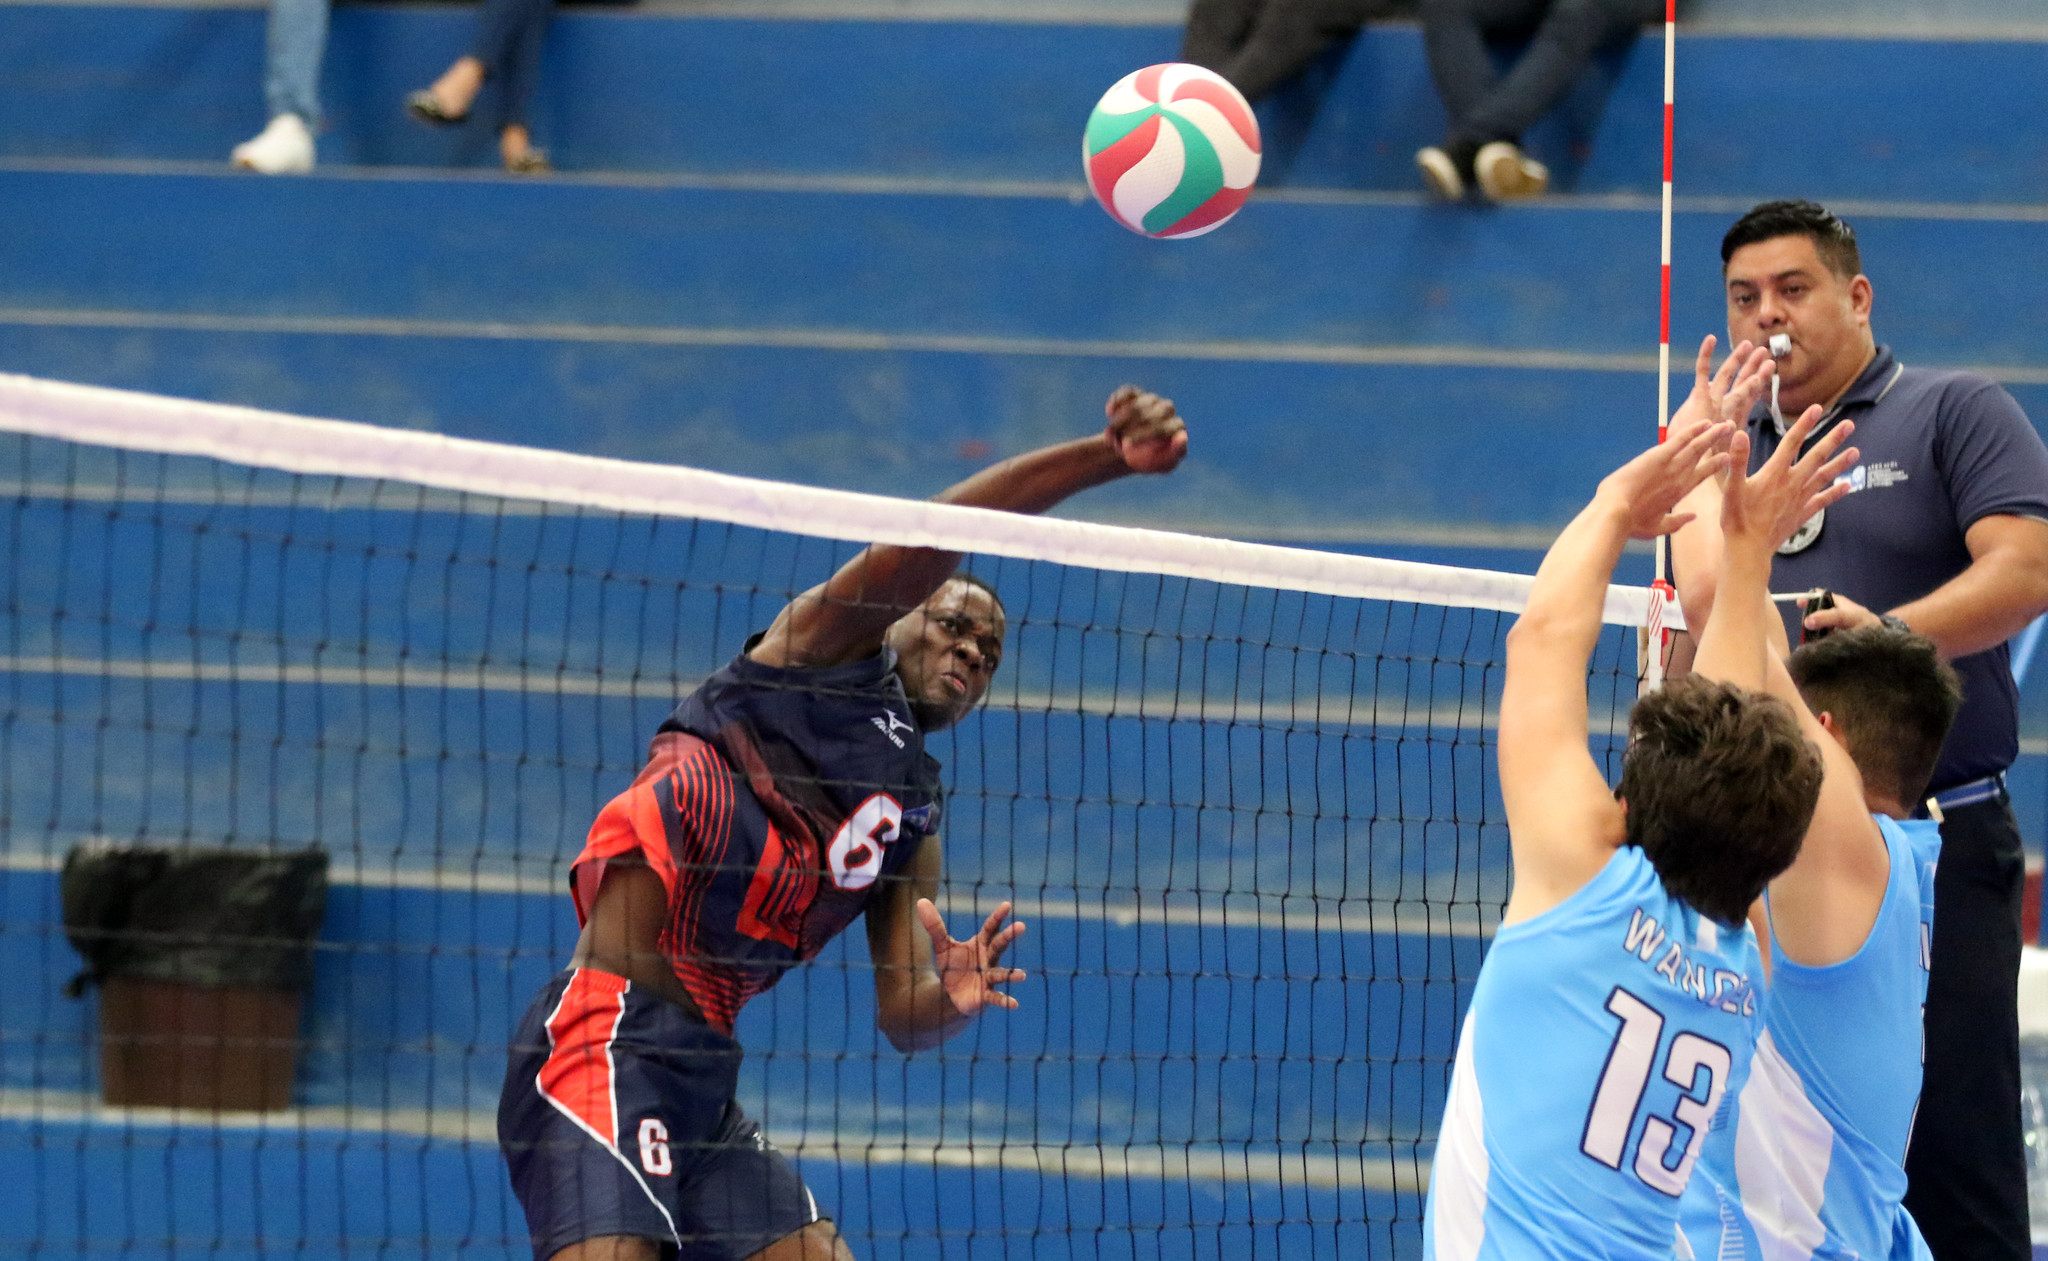 Belize opens U-19 Central American CH with five-set victory over Guatemala